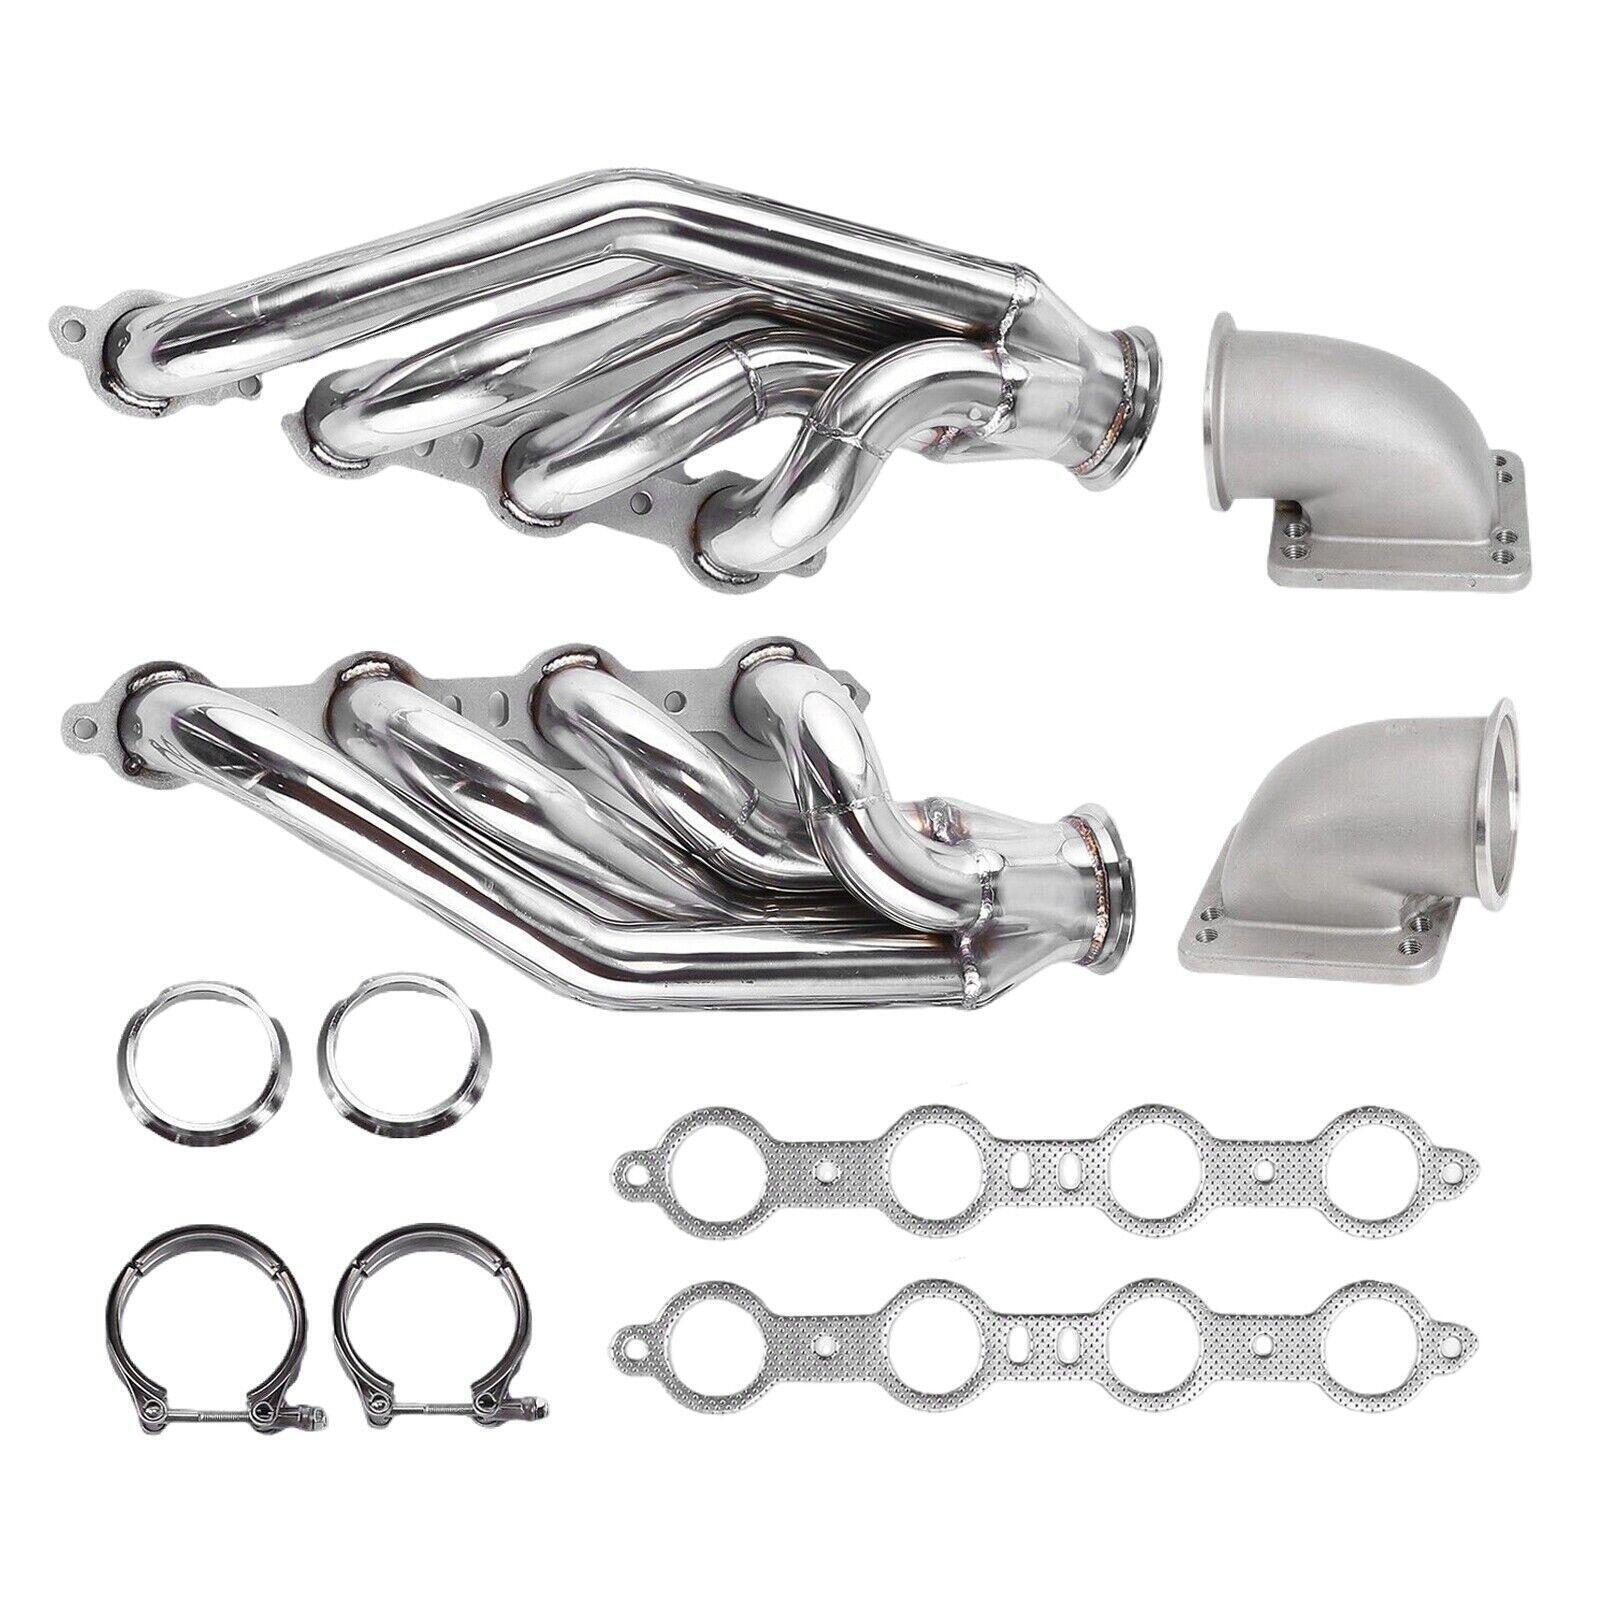 Turbo Exhaust Manifold&Headers Fit LS1 LS6 LSX GM V8+Elbows T3 T4 to 3.0\